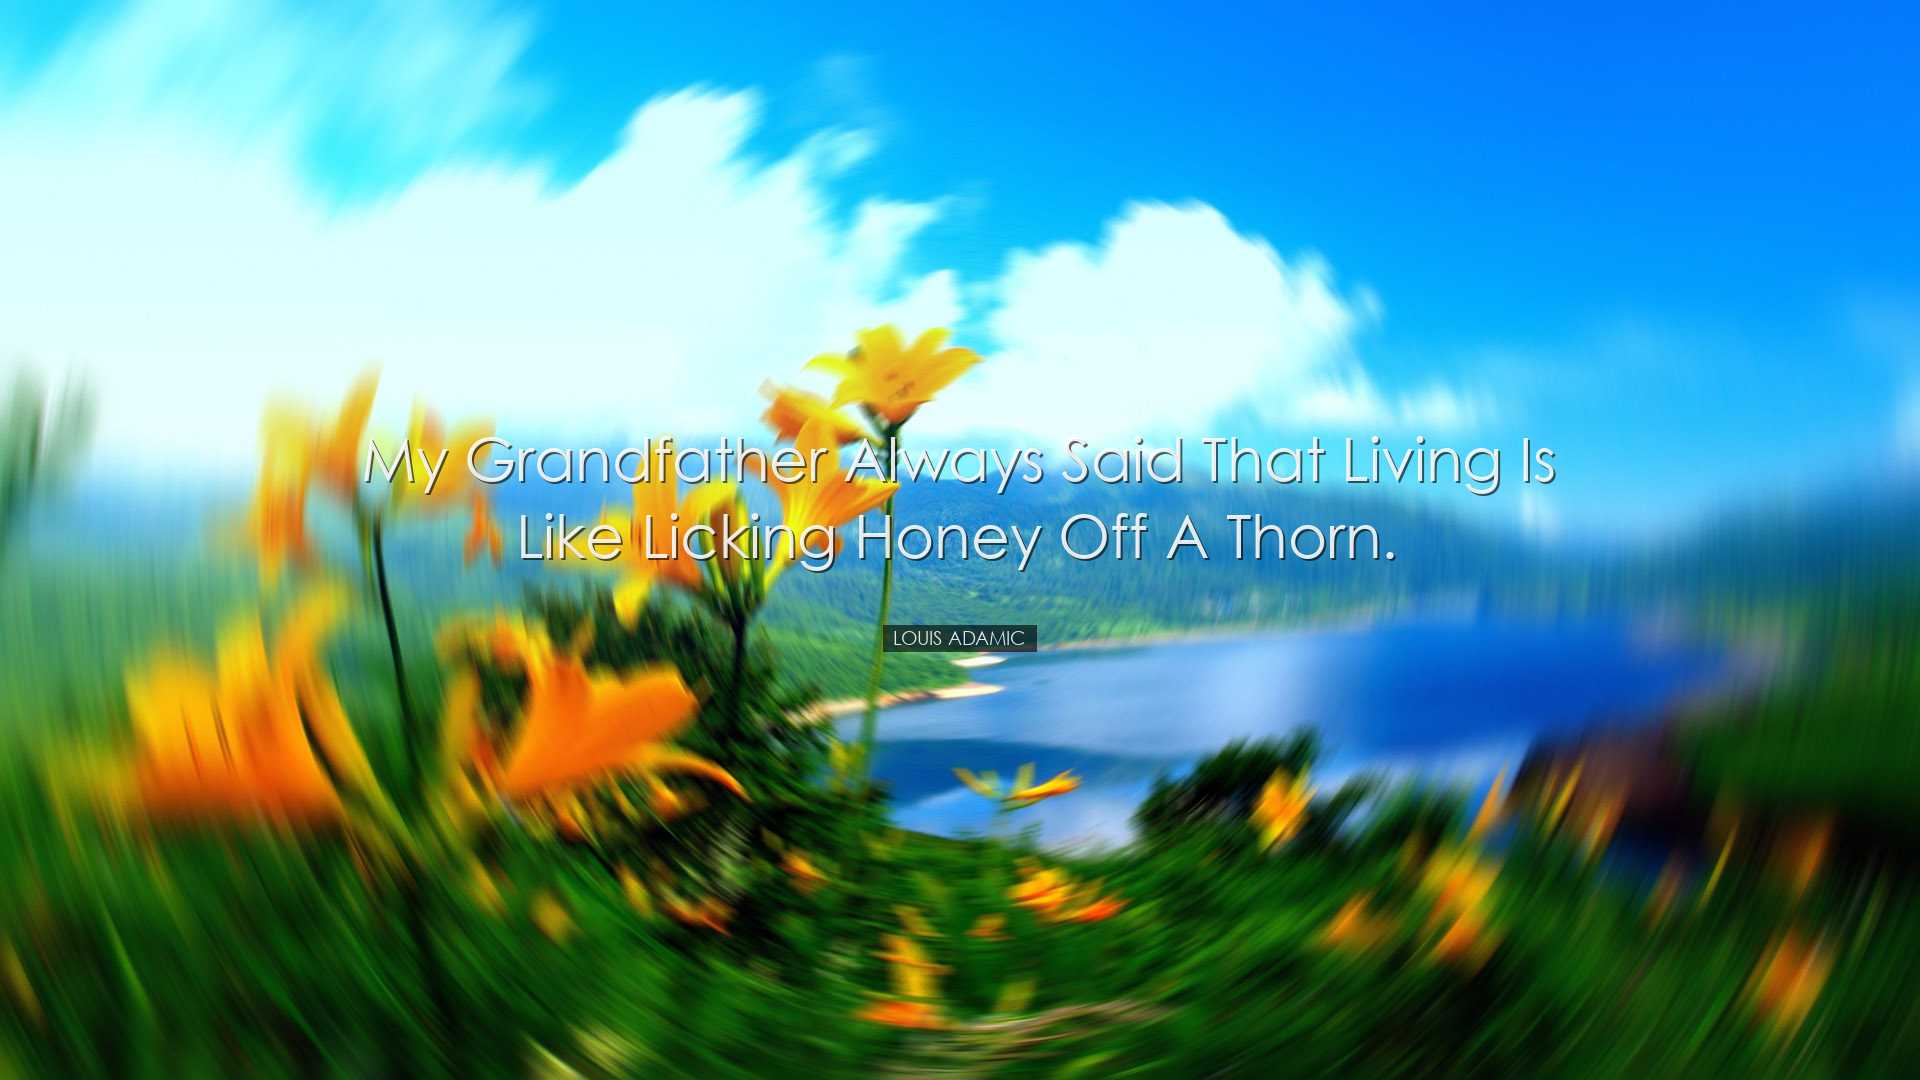 My grandfather always said that living is like licking honey off a